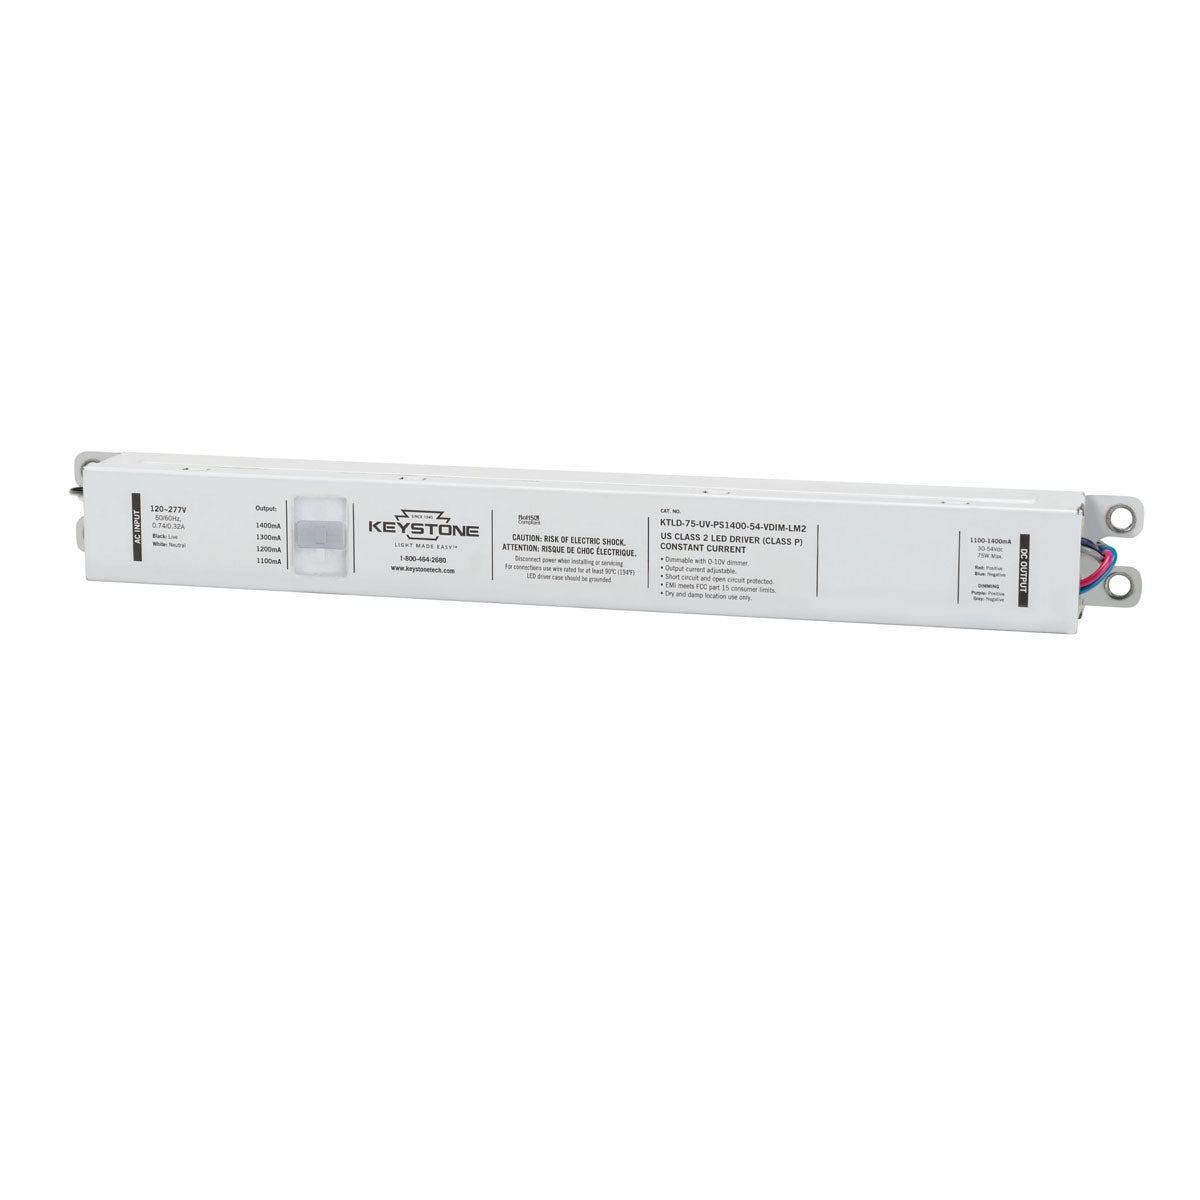 Power Select LED Driver, 75W, Adjustable Constant Current 1400-1700mA, 0-10V Dimming, 120-277V Input